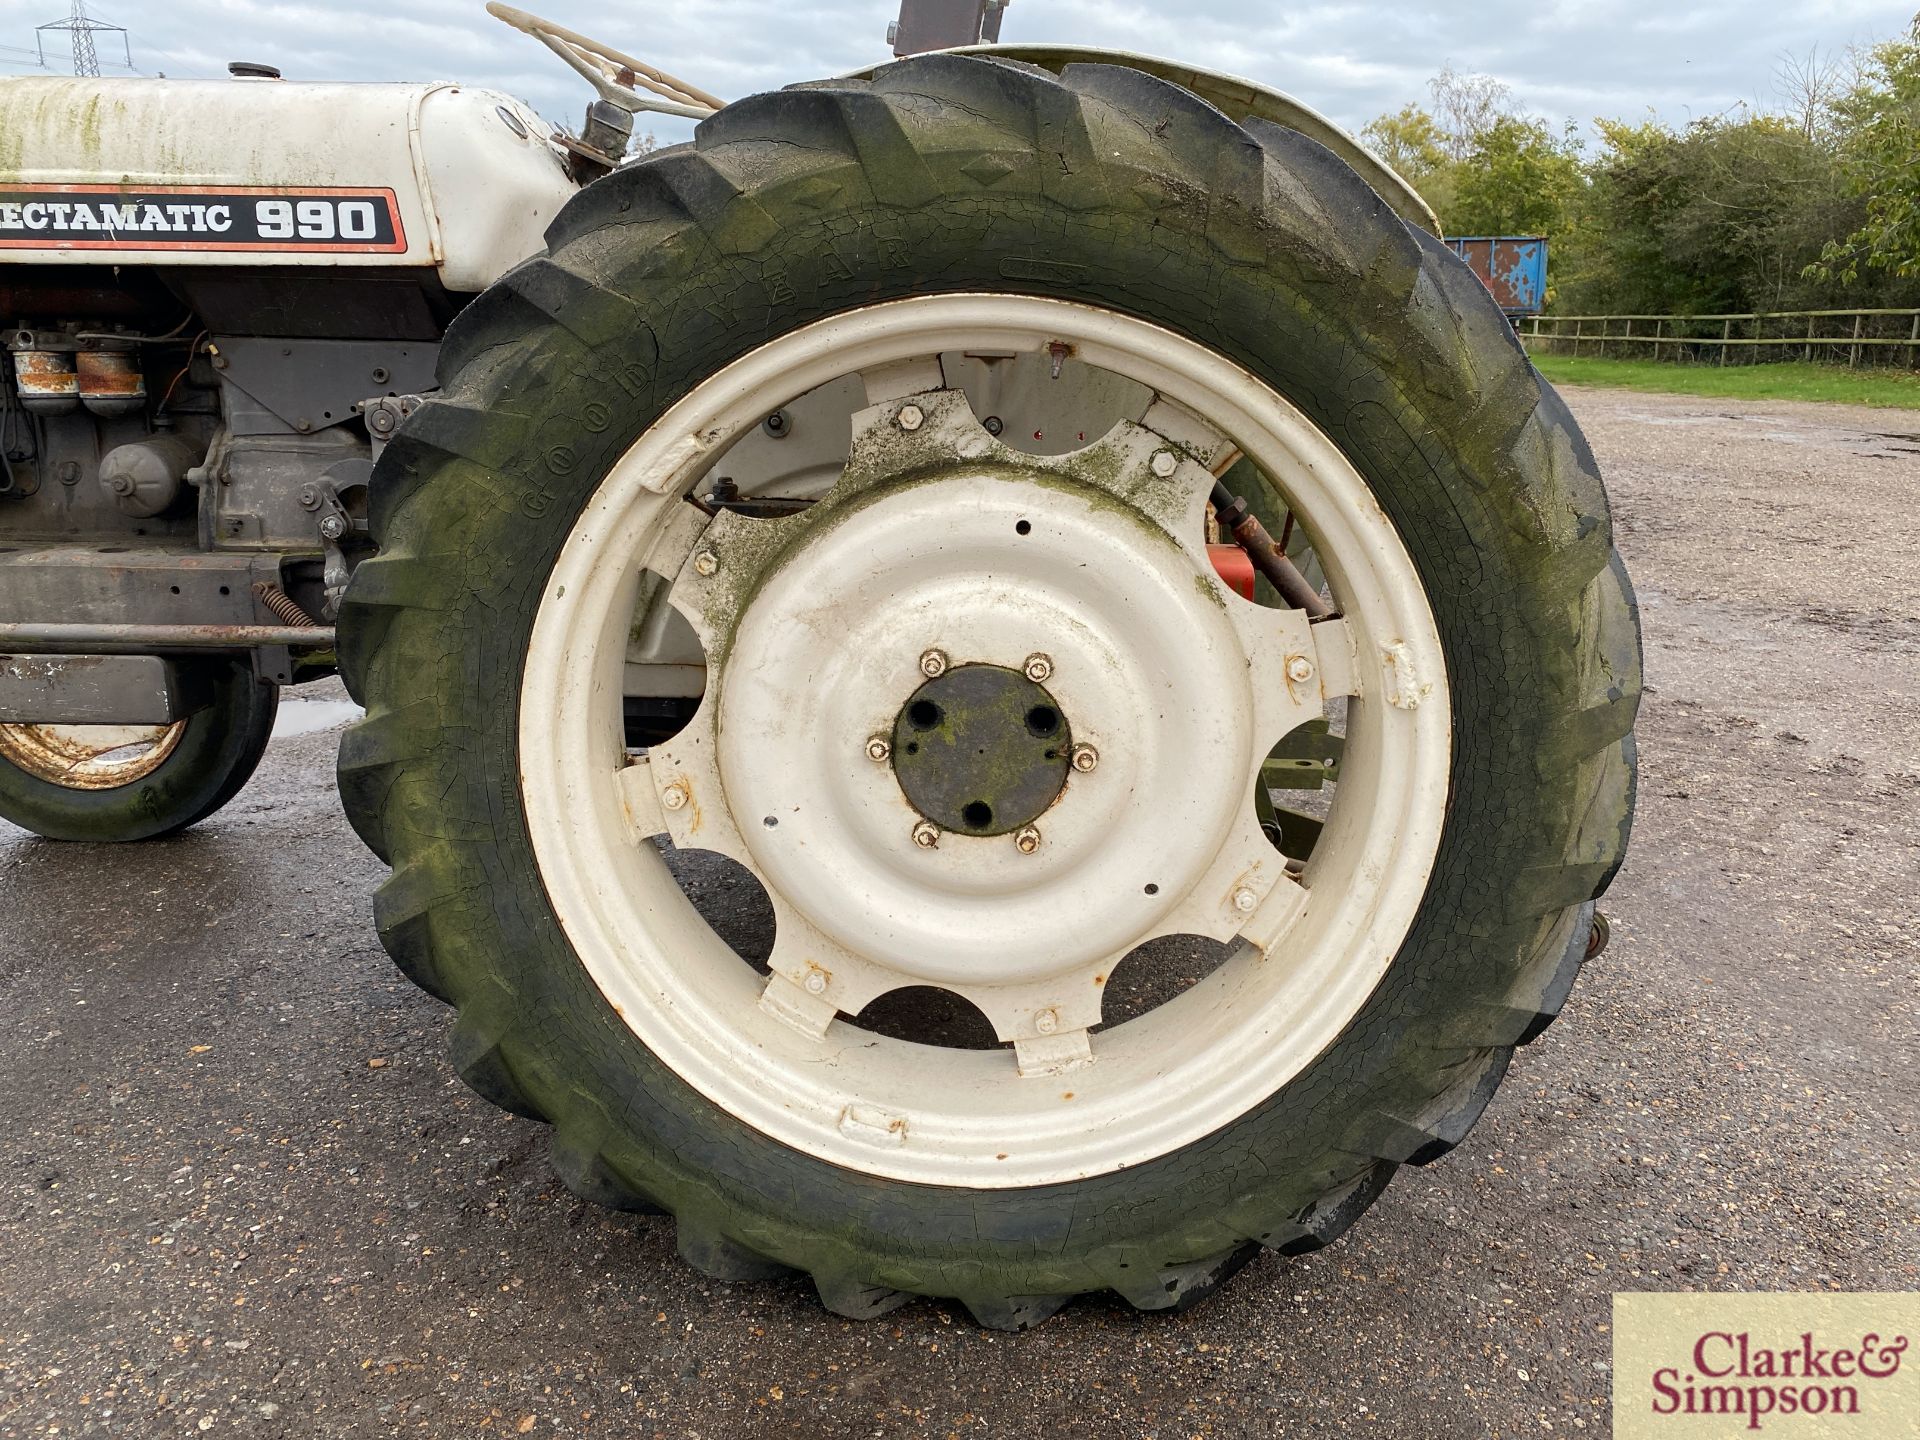 David Brown 990 Selectamatic 2WD tractor. Registration DUE 781D (no paperwork). Serial number 990A/ - Image 22 of 31